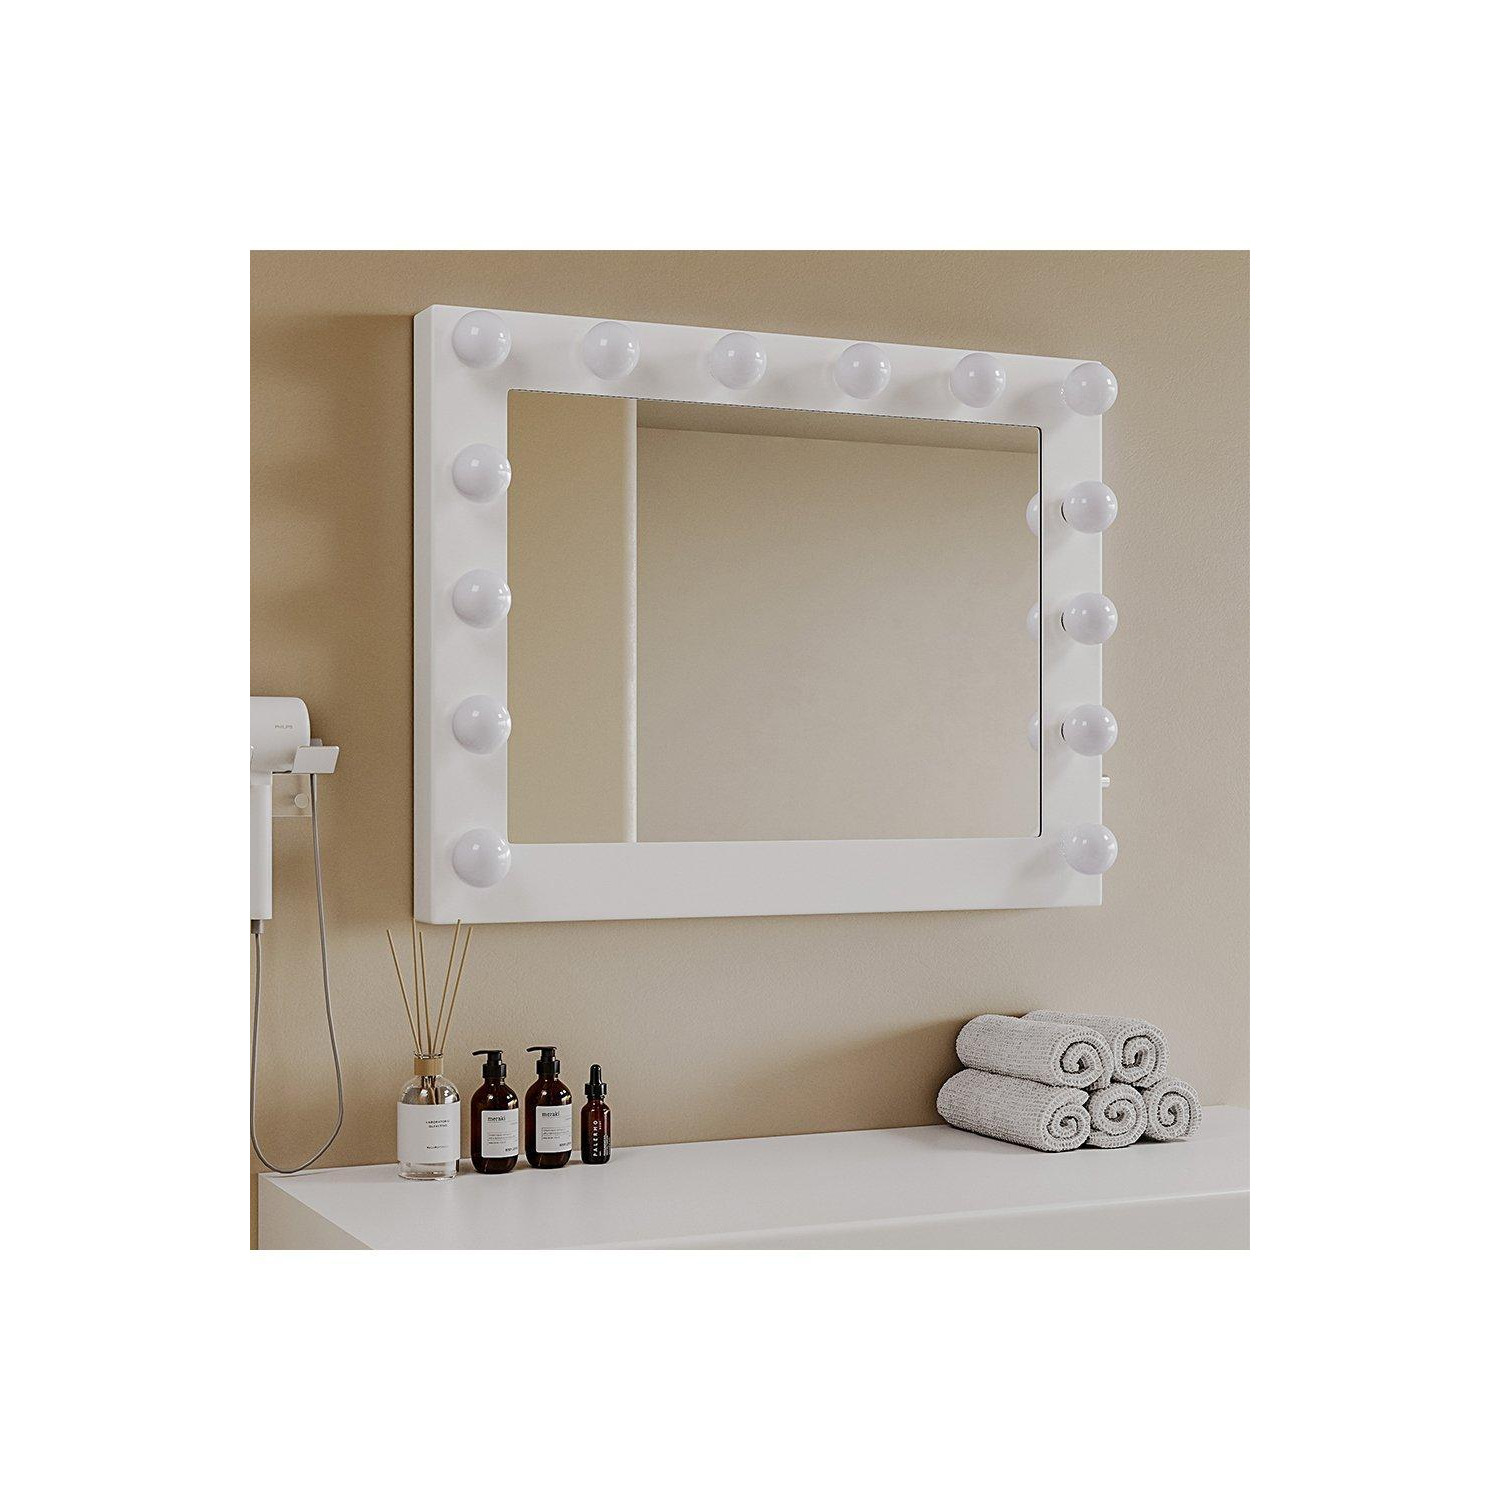 Touch Screen Hollywood Makeup Mirror Three-color Light ,Tabletop or Wall Mounted - image 1